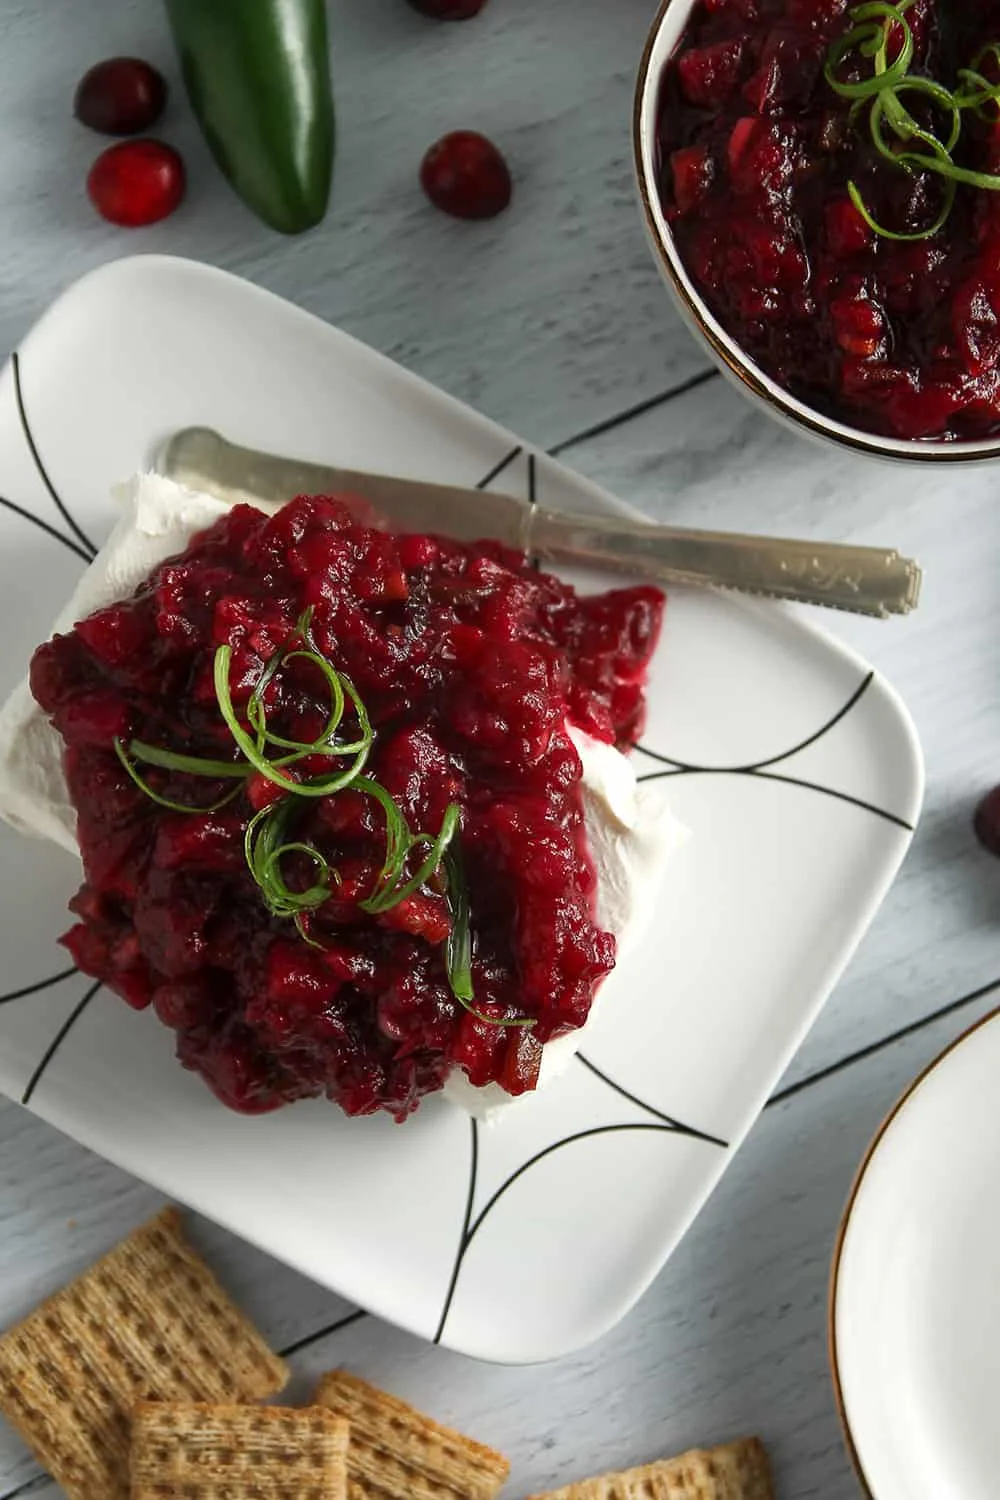 Use cream cheese and cranberry chutney to make a super easy Cranberry Cream Cheese Dip